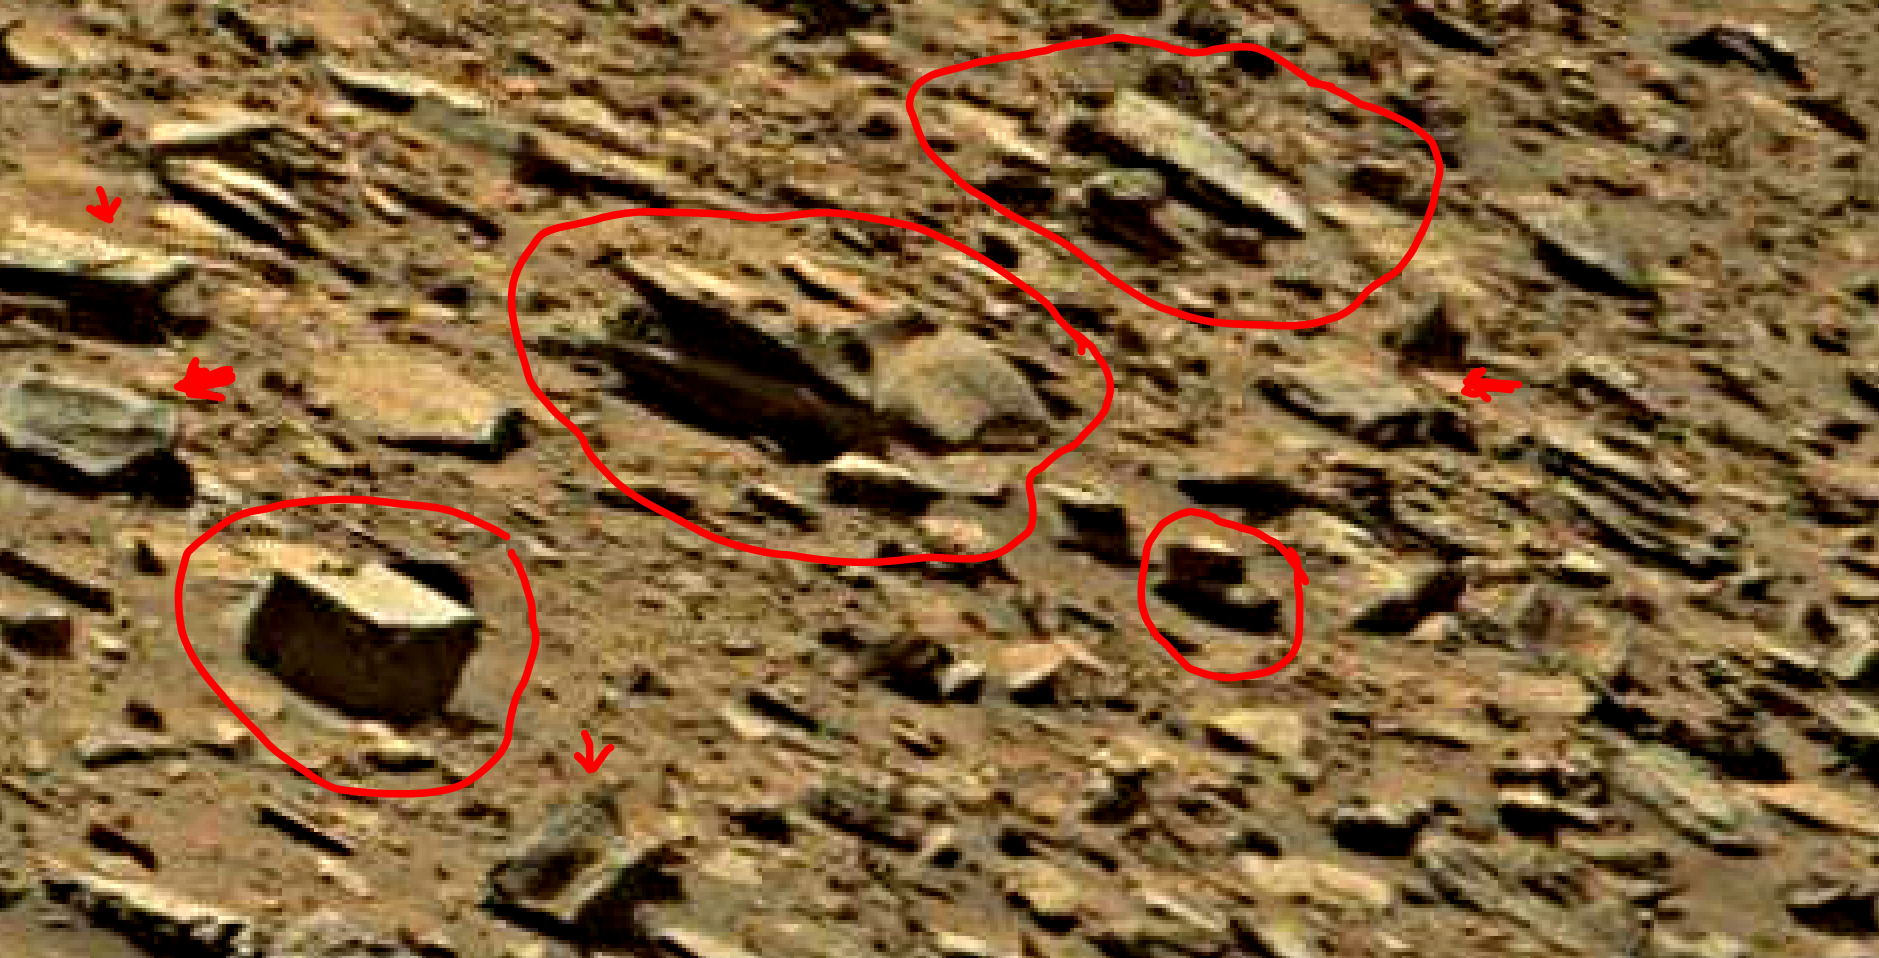 mars sol 1434 anomaly artifacts 5a was life on mars